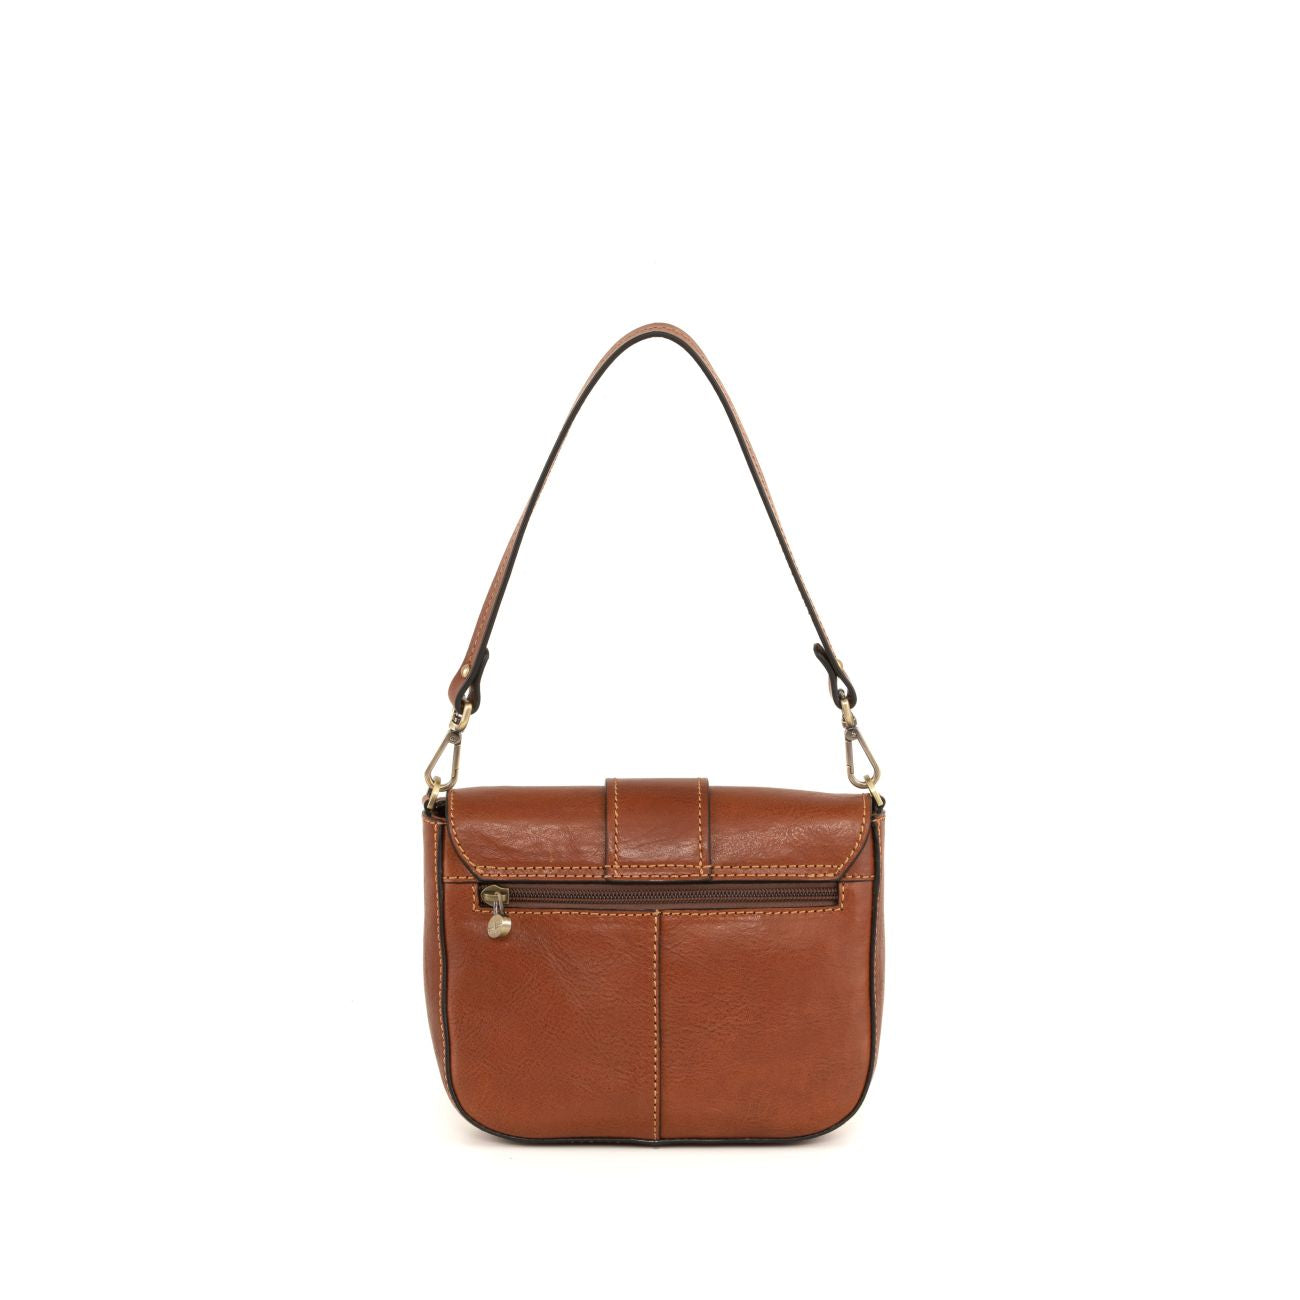 CLEO Cognac Leather Shoulder Bag by Gianni Conti